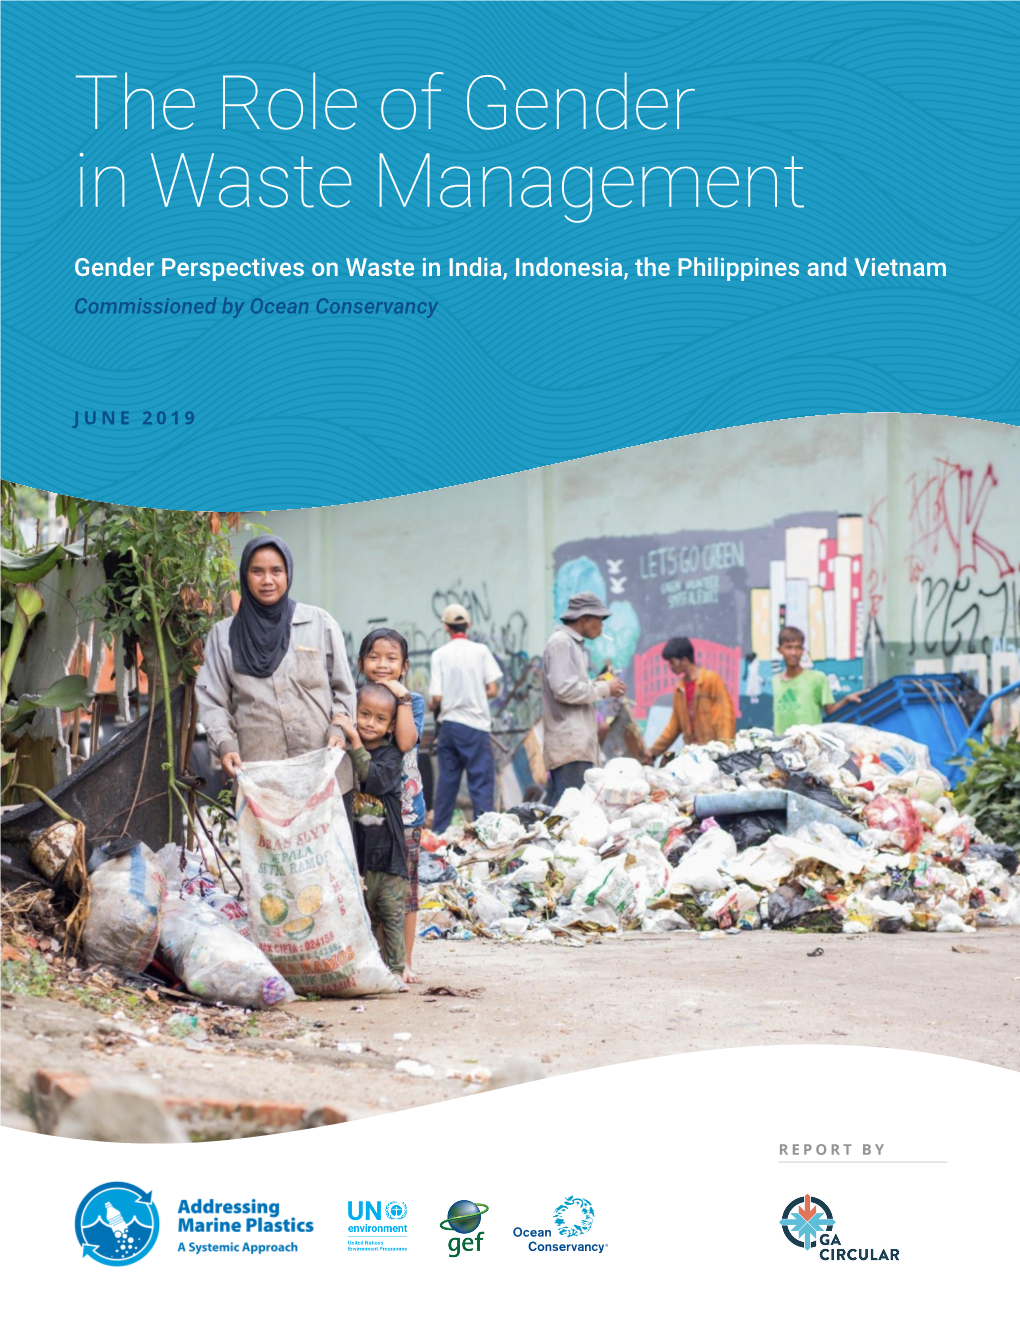 The Role of Gender in Waste Management